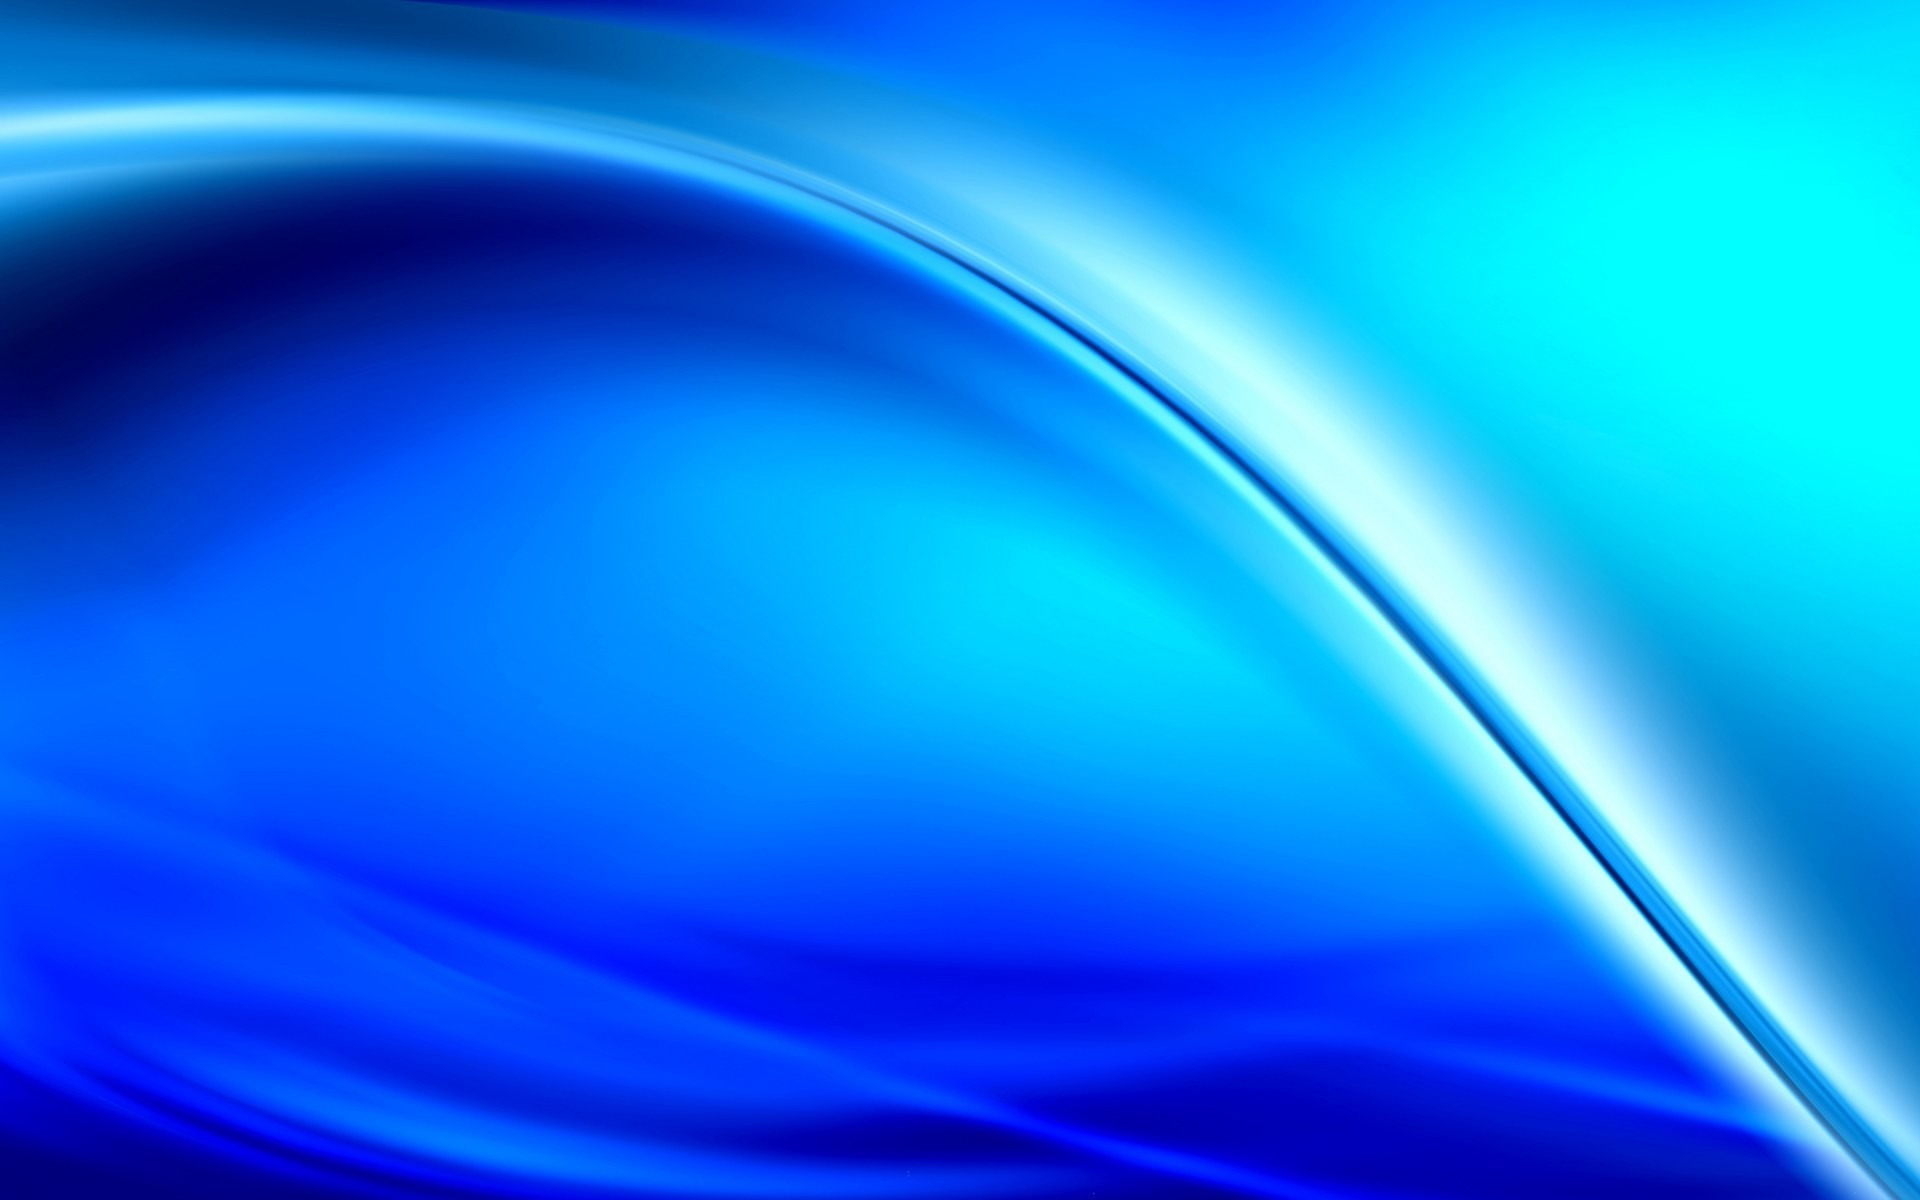 1920x1200 Abstract Blue 2126 Hd Wallpapers in Abstract - Imagesci.com